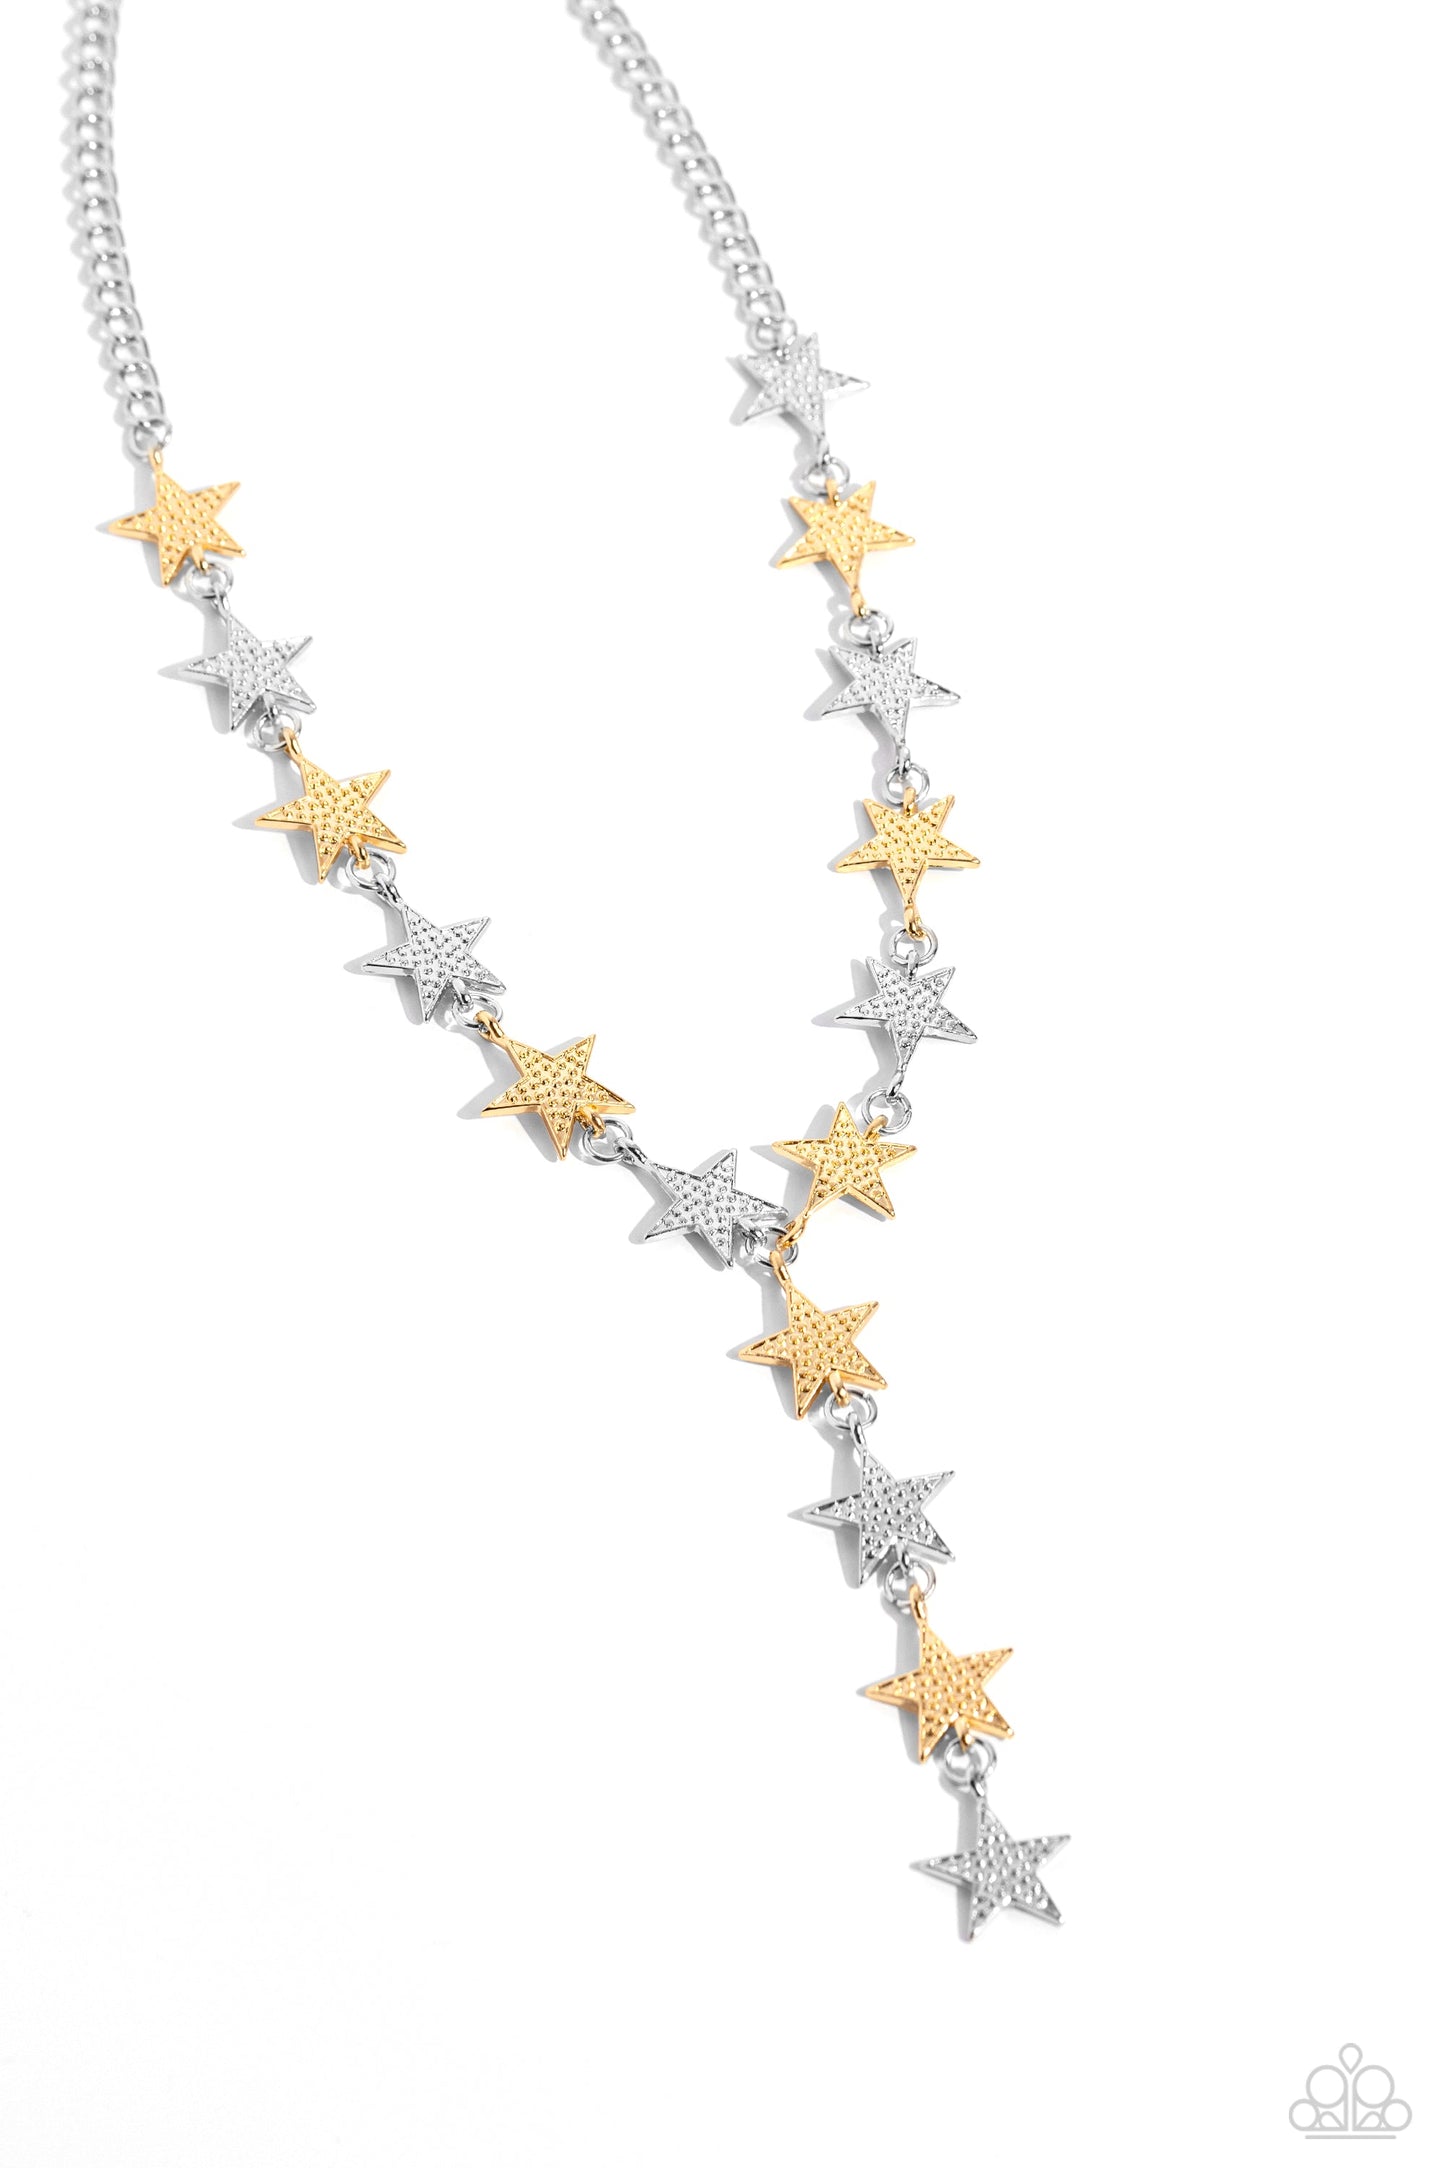 Reach for the Stars - Gold and Silver Necklace - Paparazzi Accessories - Featuring a studded motif, a collection of gold and silver stars alternate and interlock below the collar on a classic silver chain, glistening into an edgy extended pendant for a stellar-making finish.